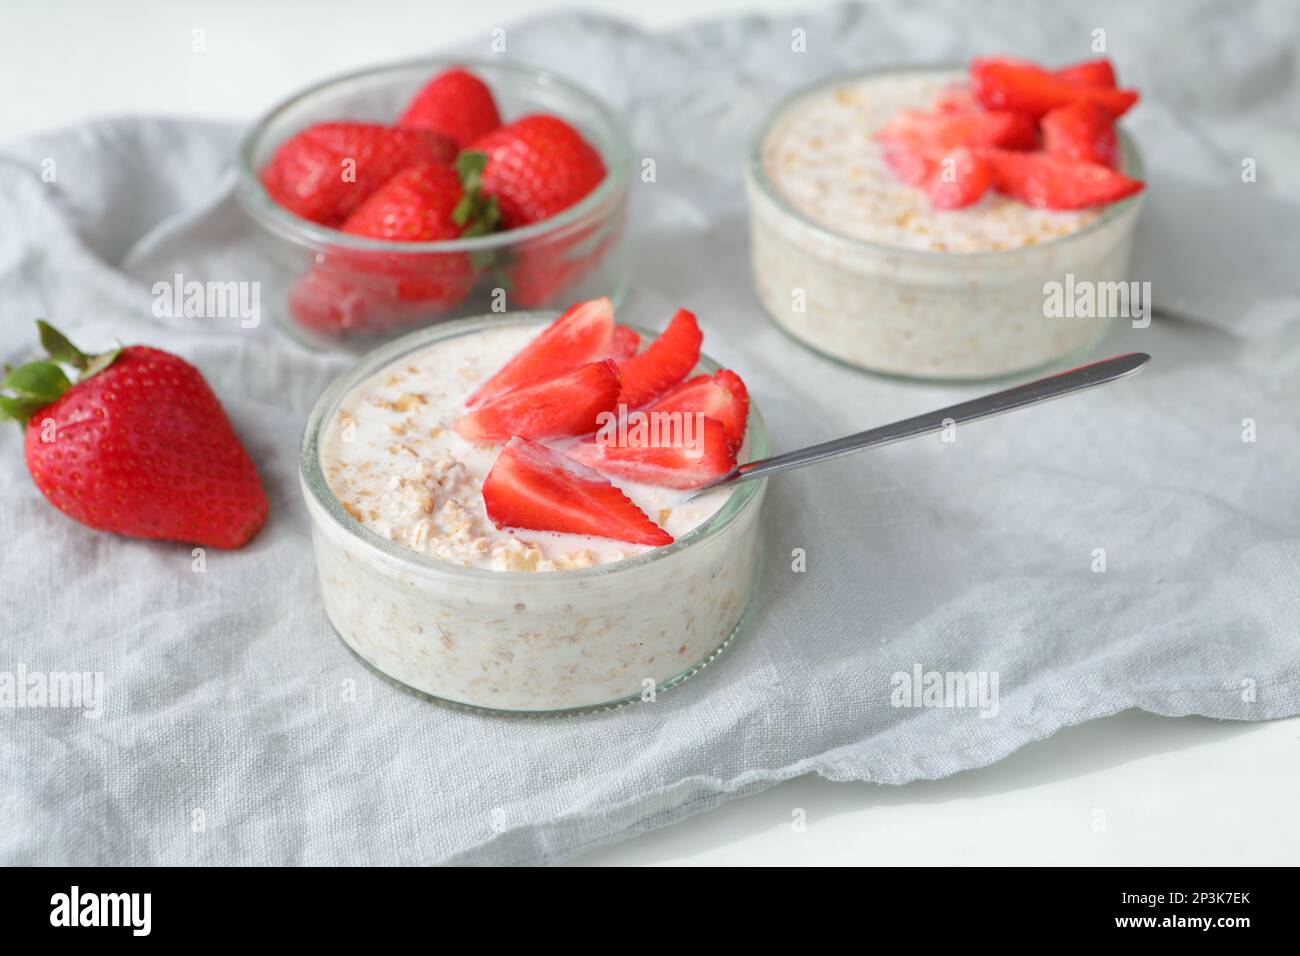 Healthy breakfast: two portions of muesli with milk  and sliced fresh strawberries Stock Photo